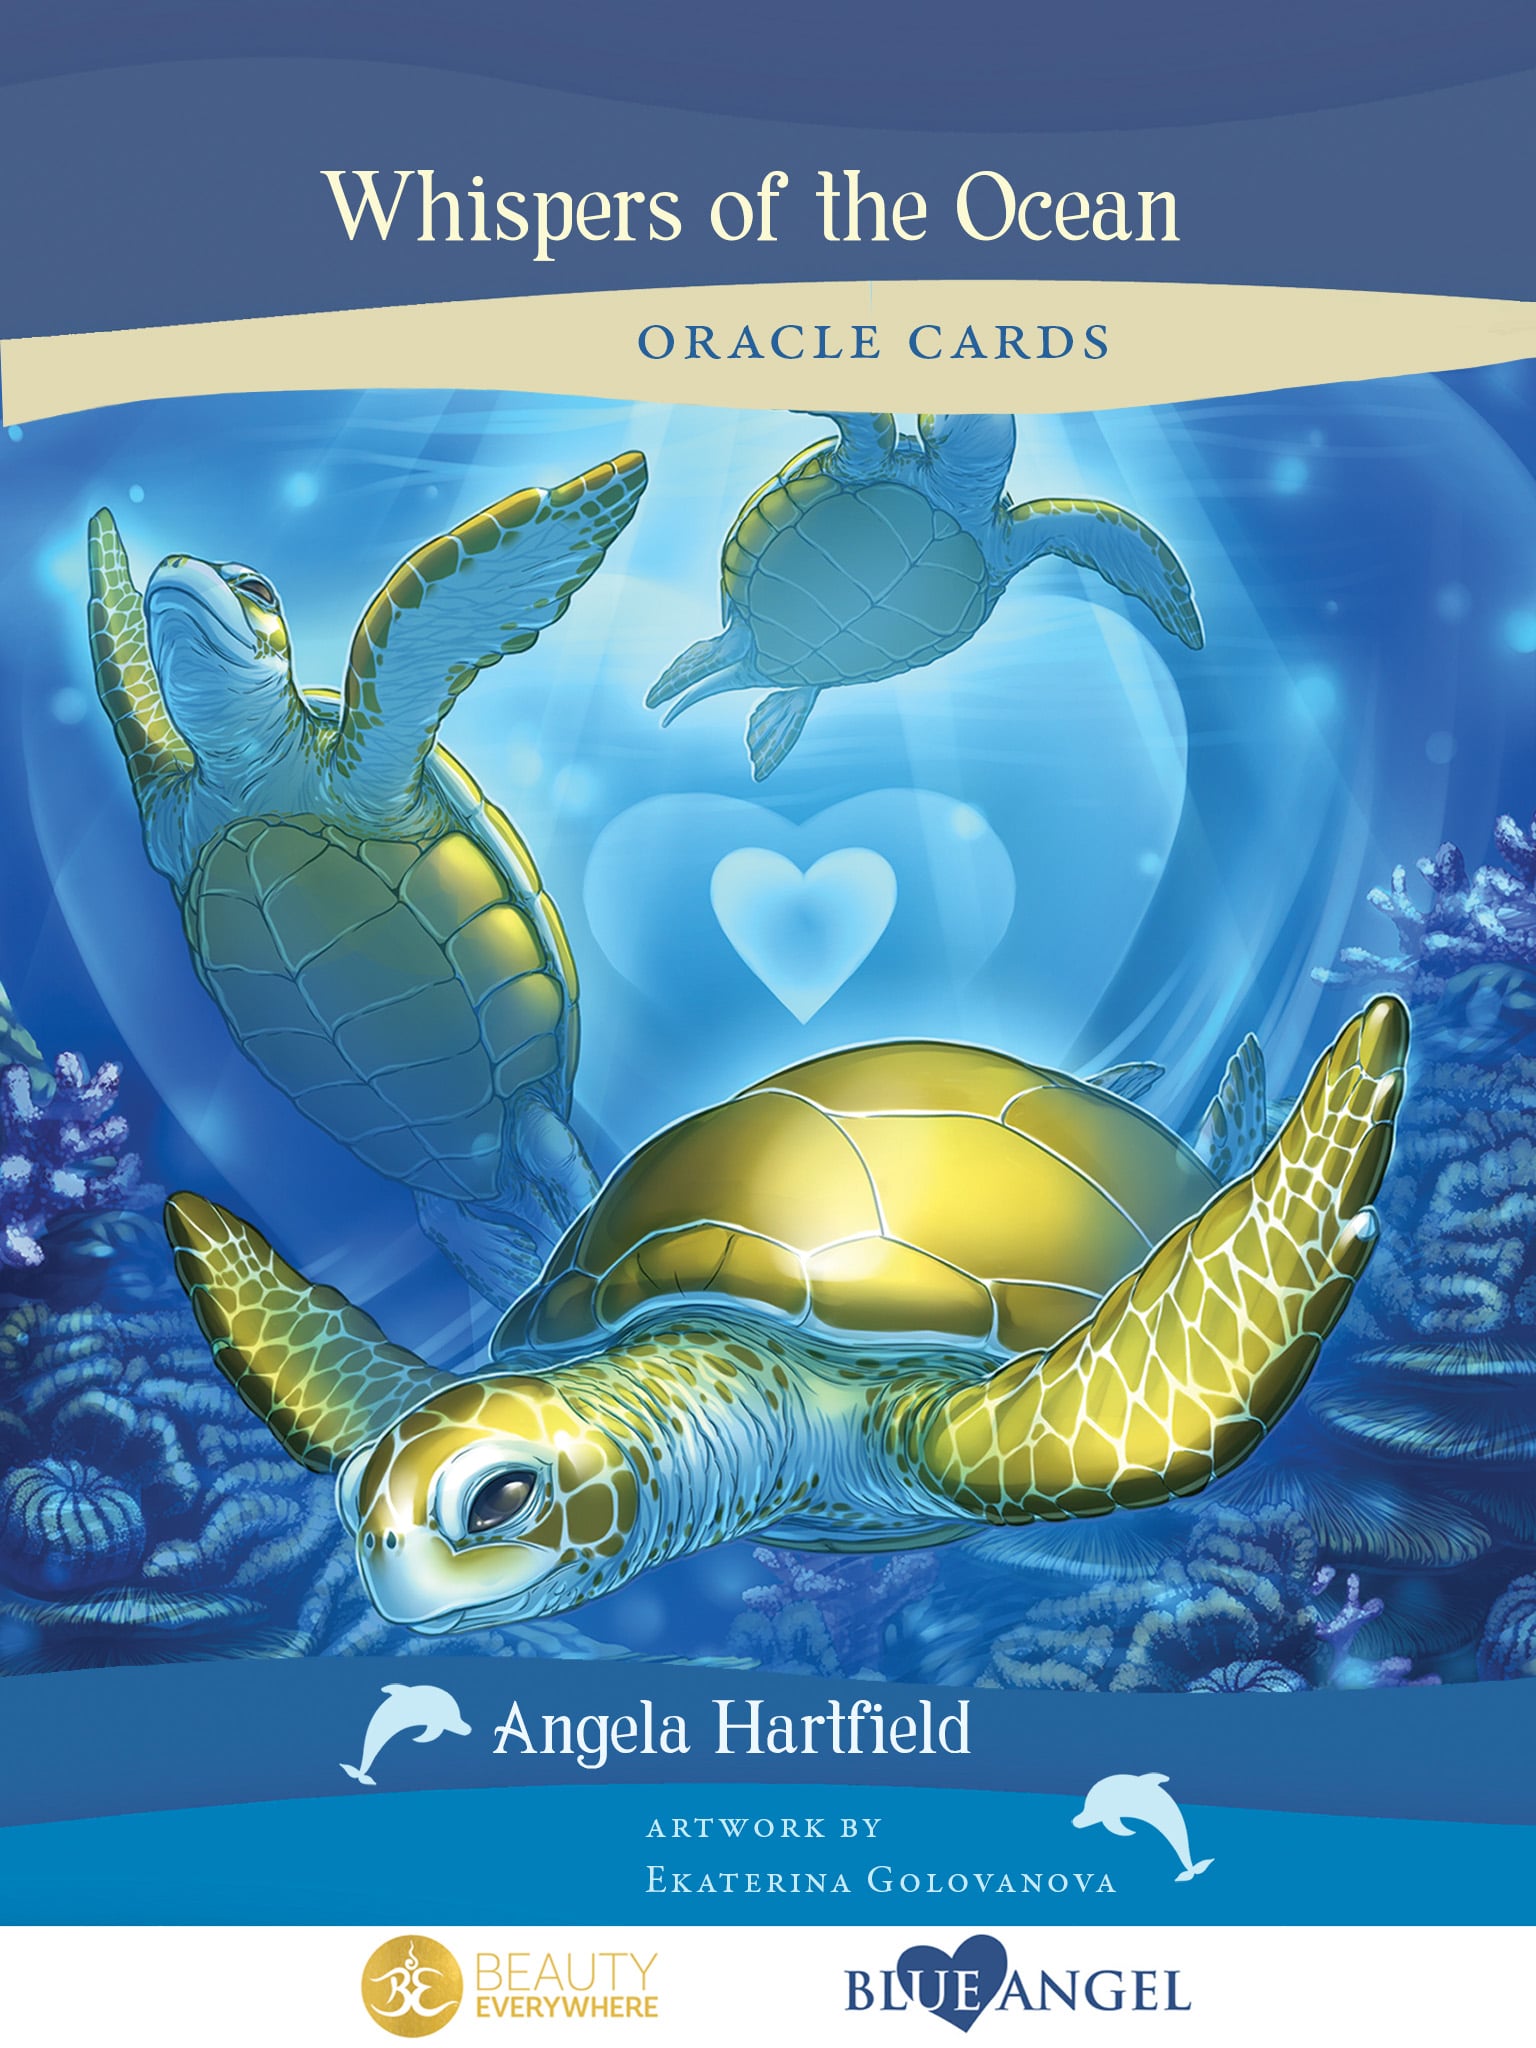 Whispers of the Ocean Oracle by Angela Hartfield